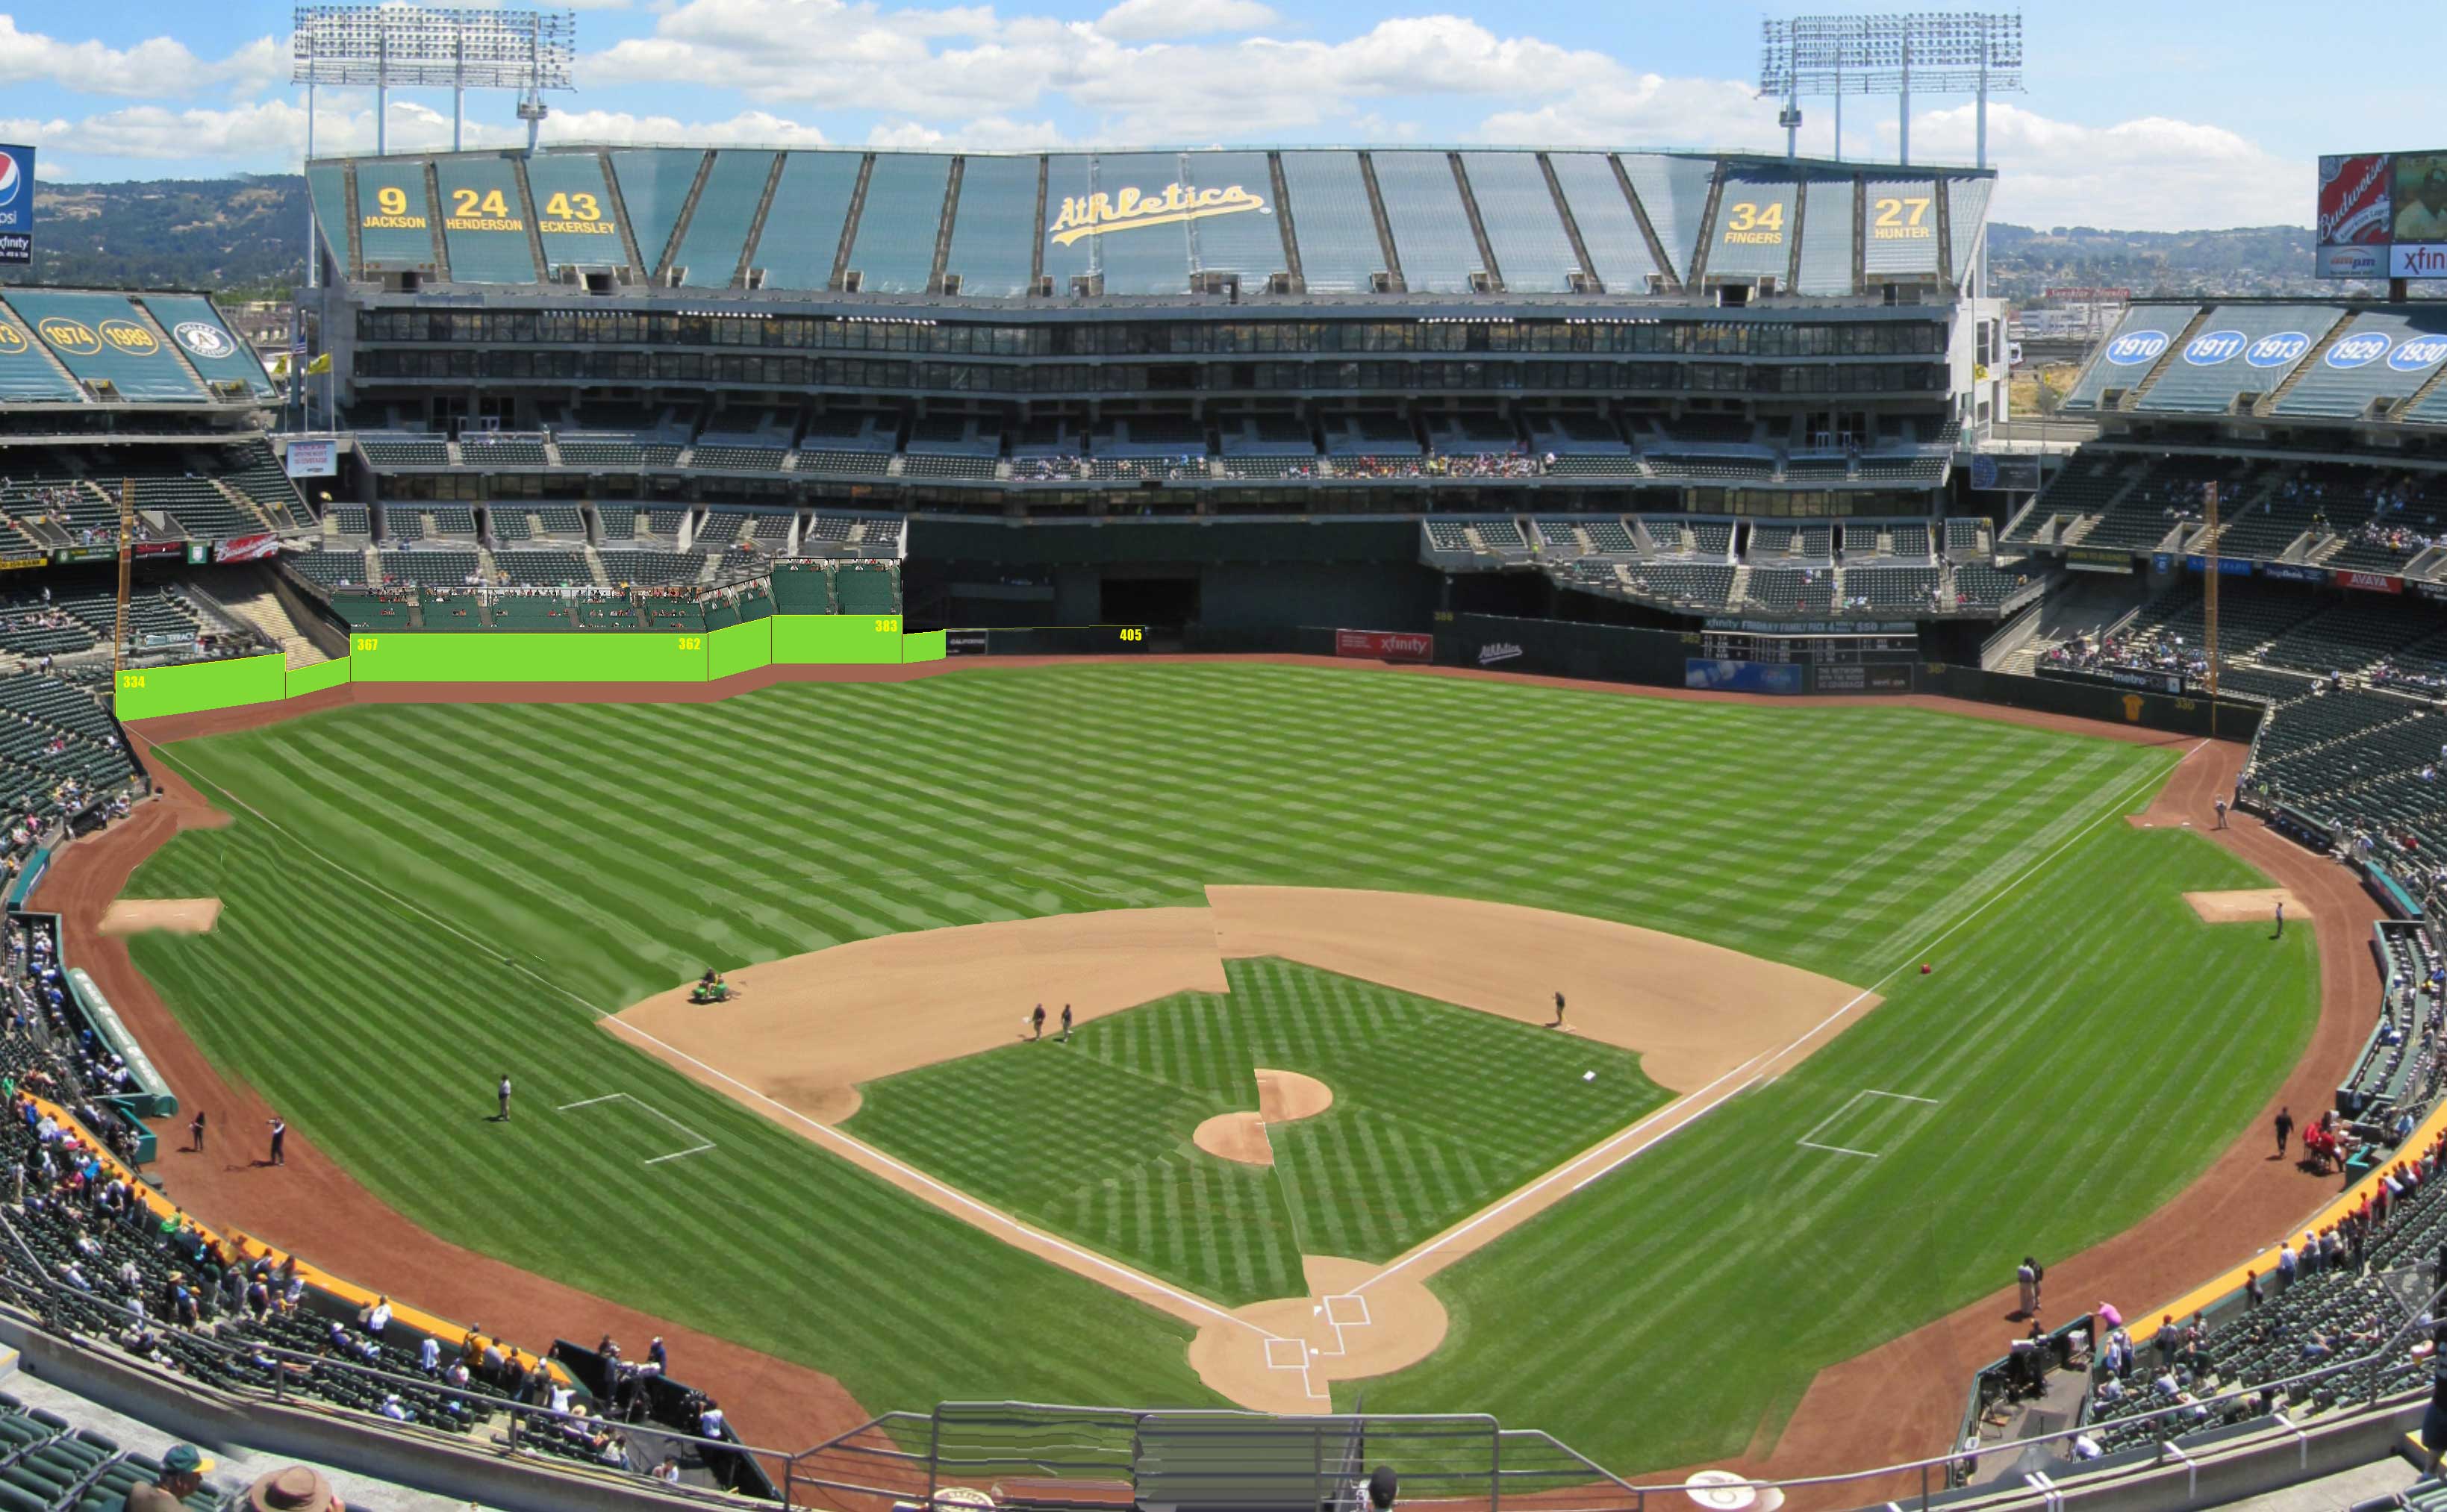 Seven bizarre ballpark features from baseball history that you'll ...